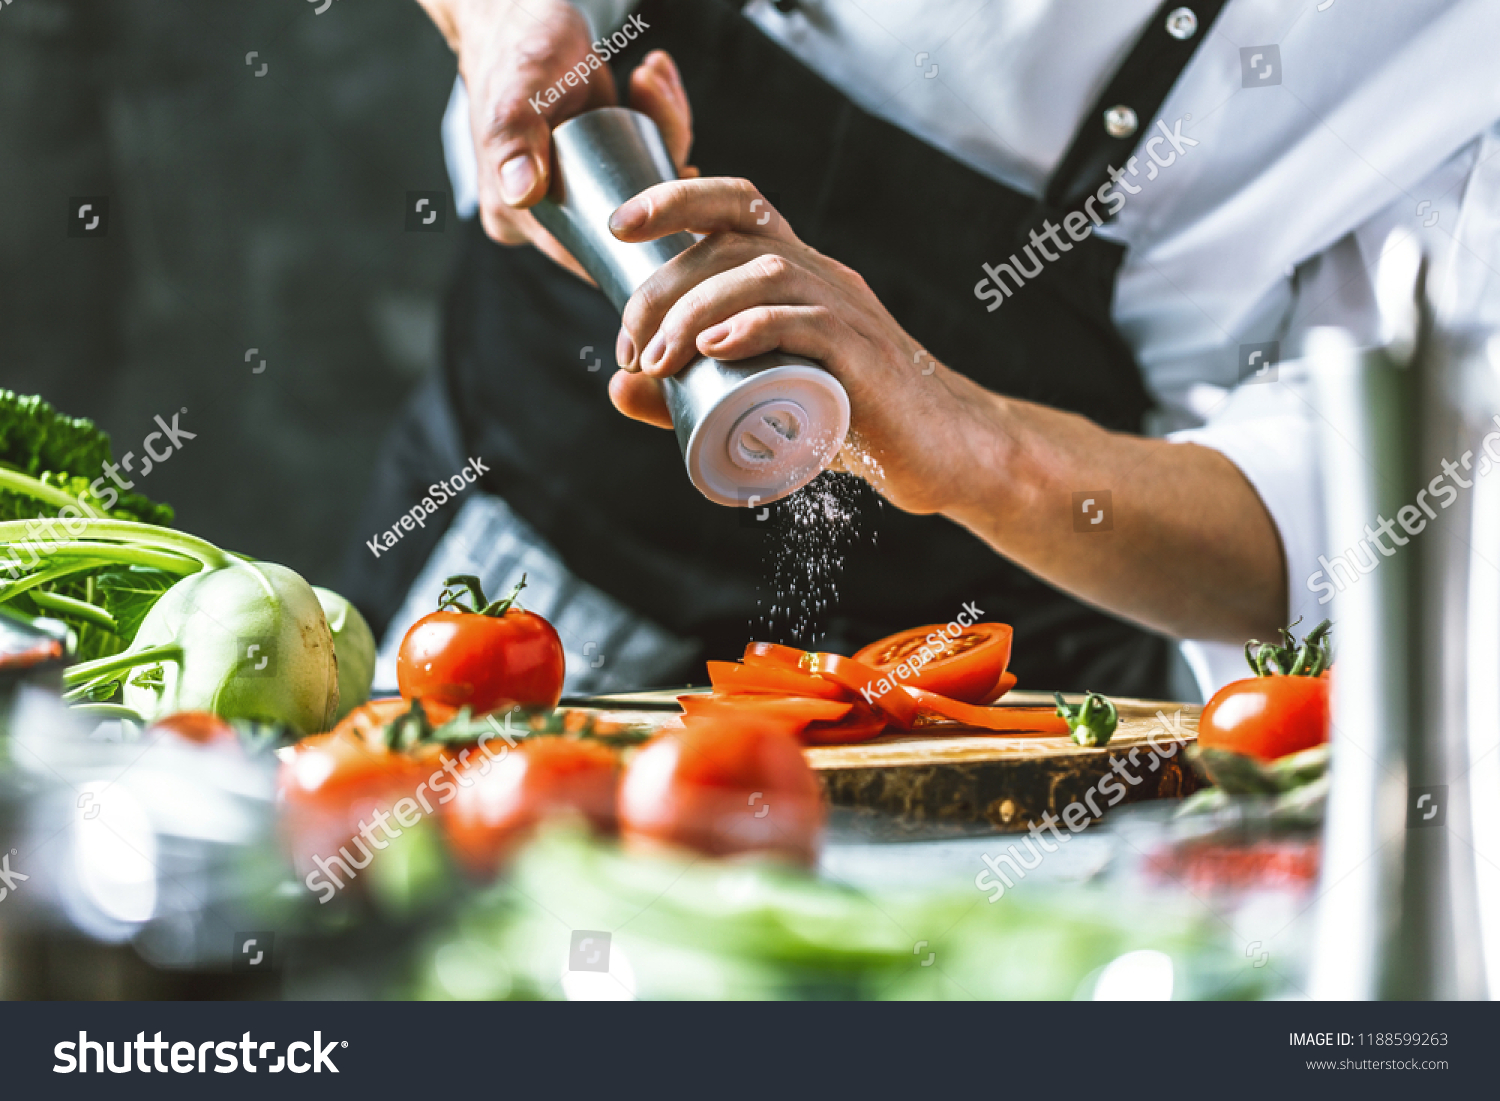 Chef cook preparing vegetables in his kitchen. #1188599263